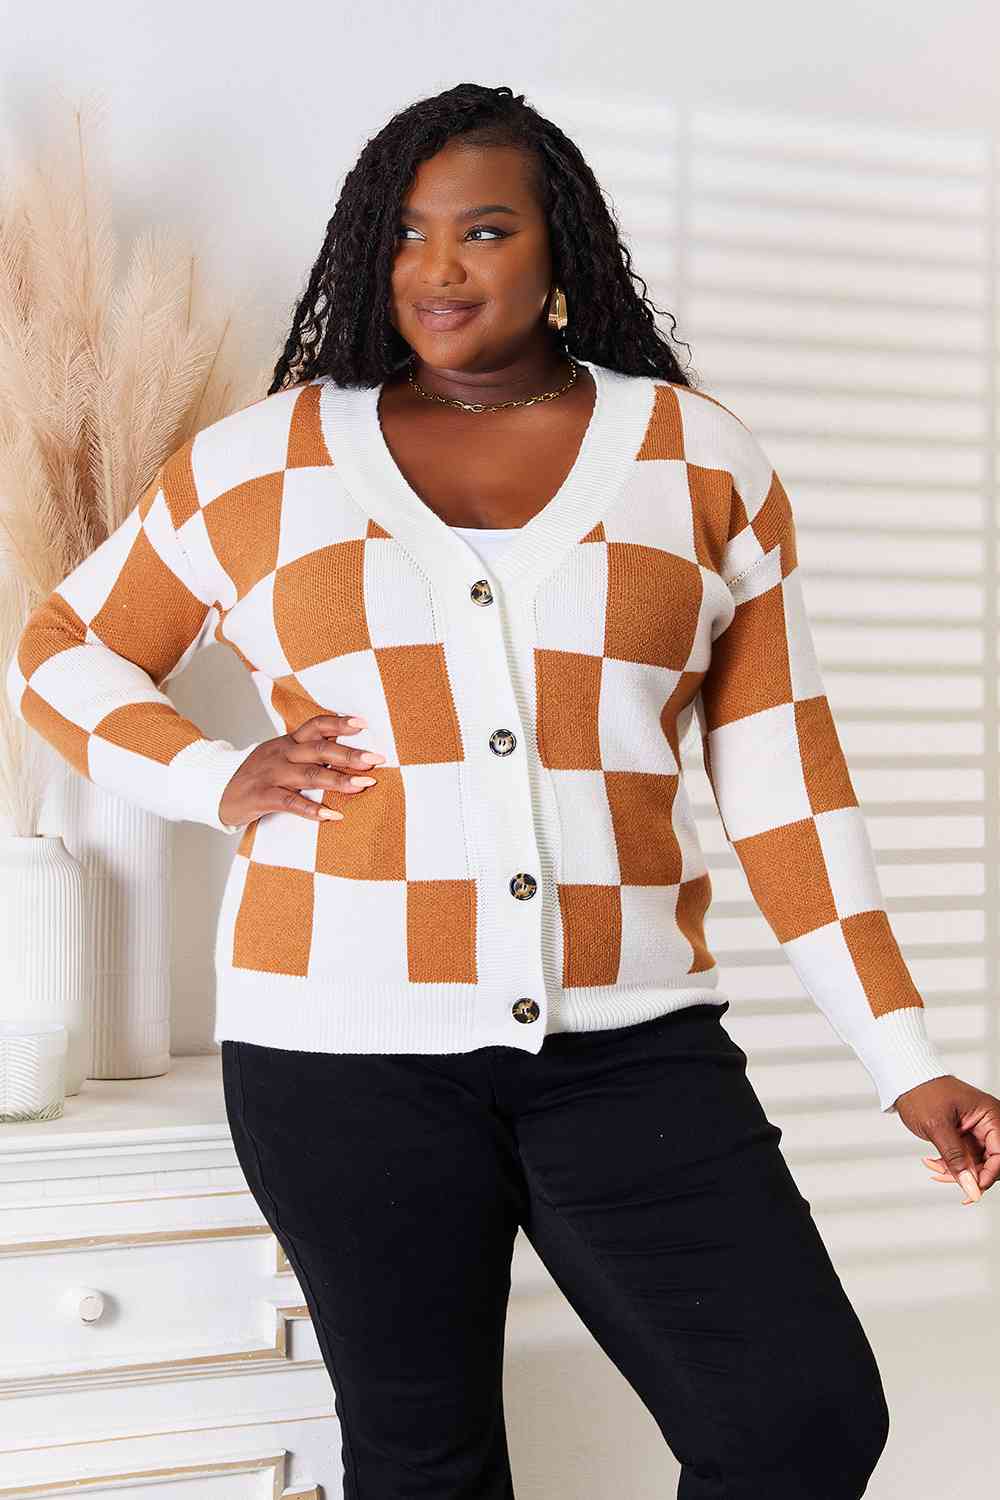 Brown and white checkered sweater